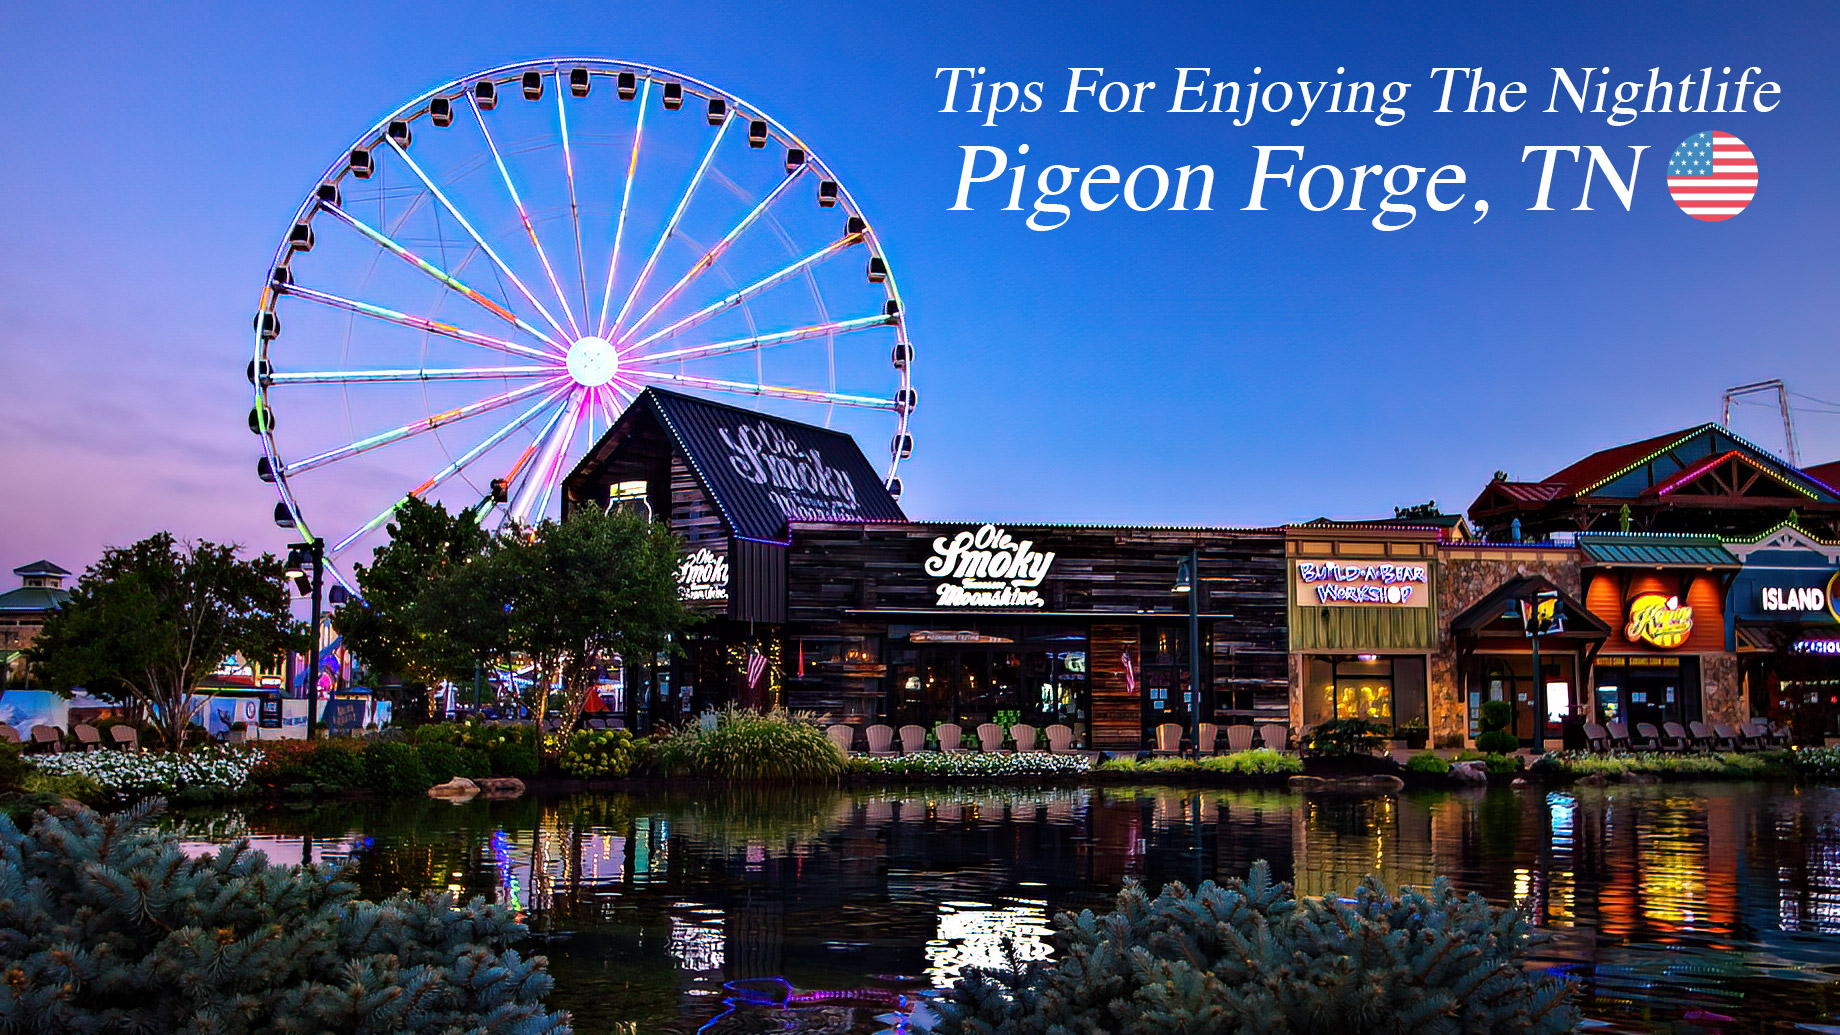 Tips For Enjoying The Nightlife In Pigeon Forge, Tennessee